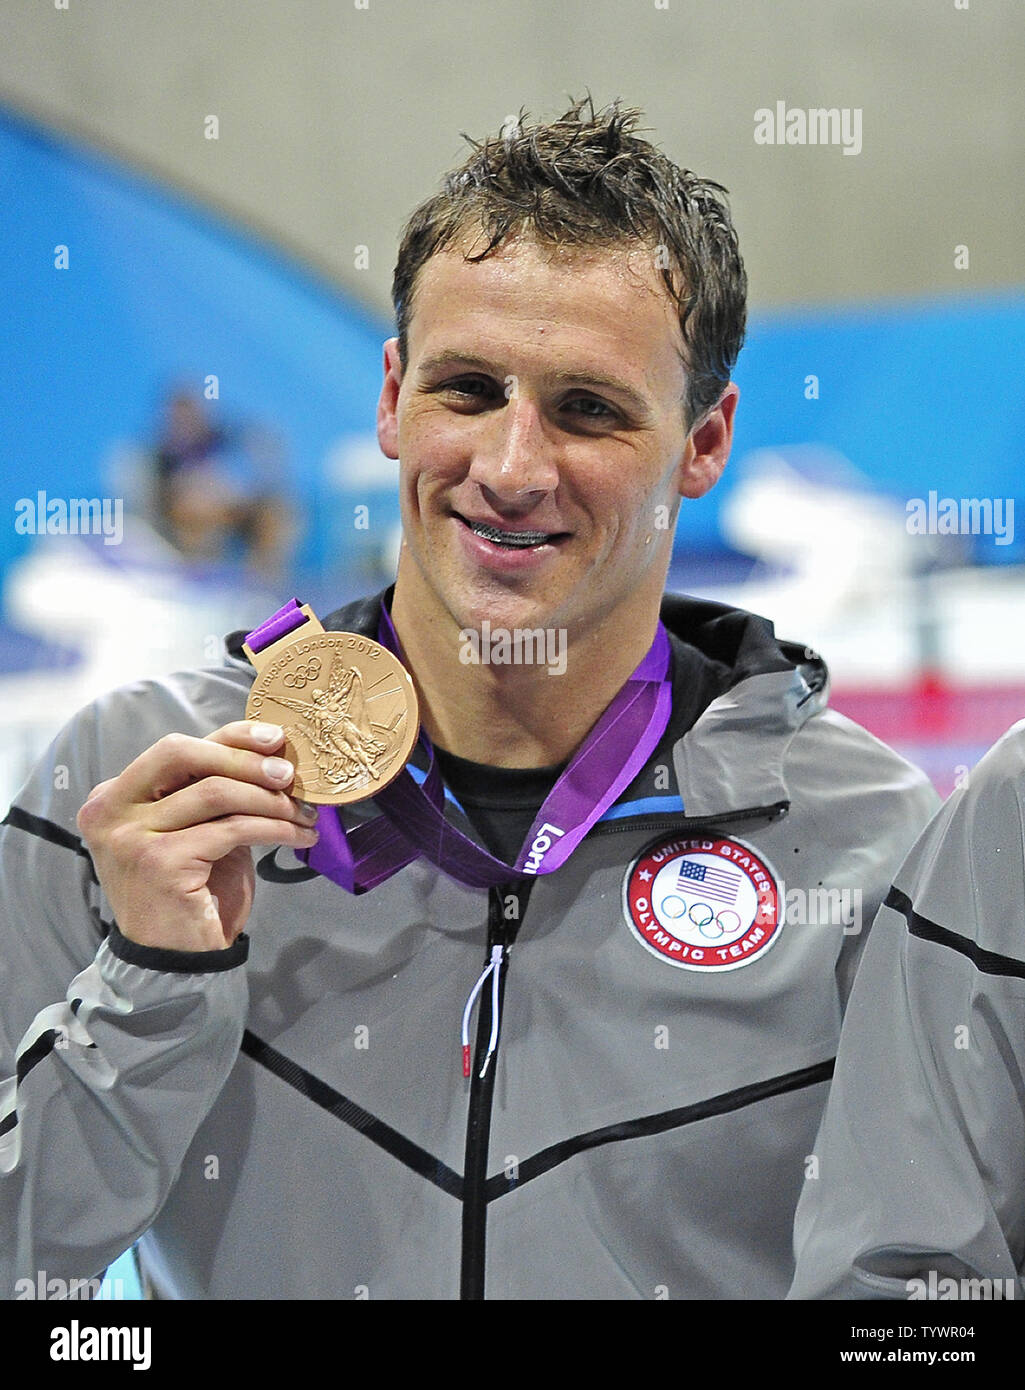 Ryan Lochte of the United States shows off the Bronze Medal he won in the Men's 200m Backstroke Finals with a time of 1:53.94 at the London 2012 Summer Olympics on August 2, 2012 in London.  Lochte won two medals on the night.  The other was a Silver Medal with a time of 1:54.90 in the Men's 200m Individual Medley Final. UPI/Ron Sachs Stock Photo